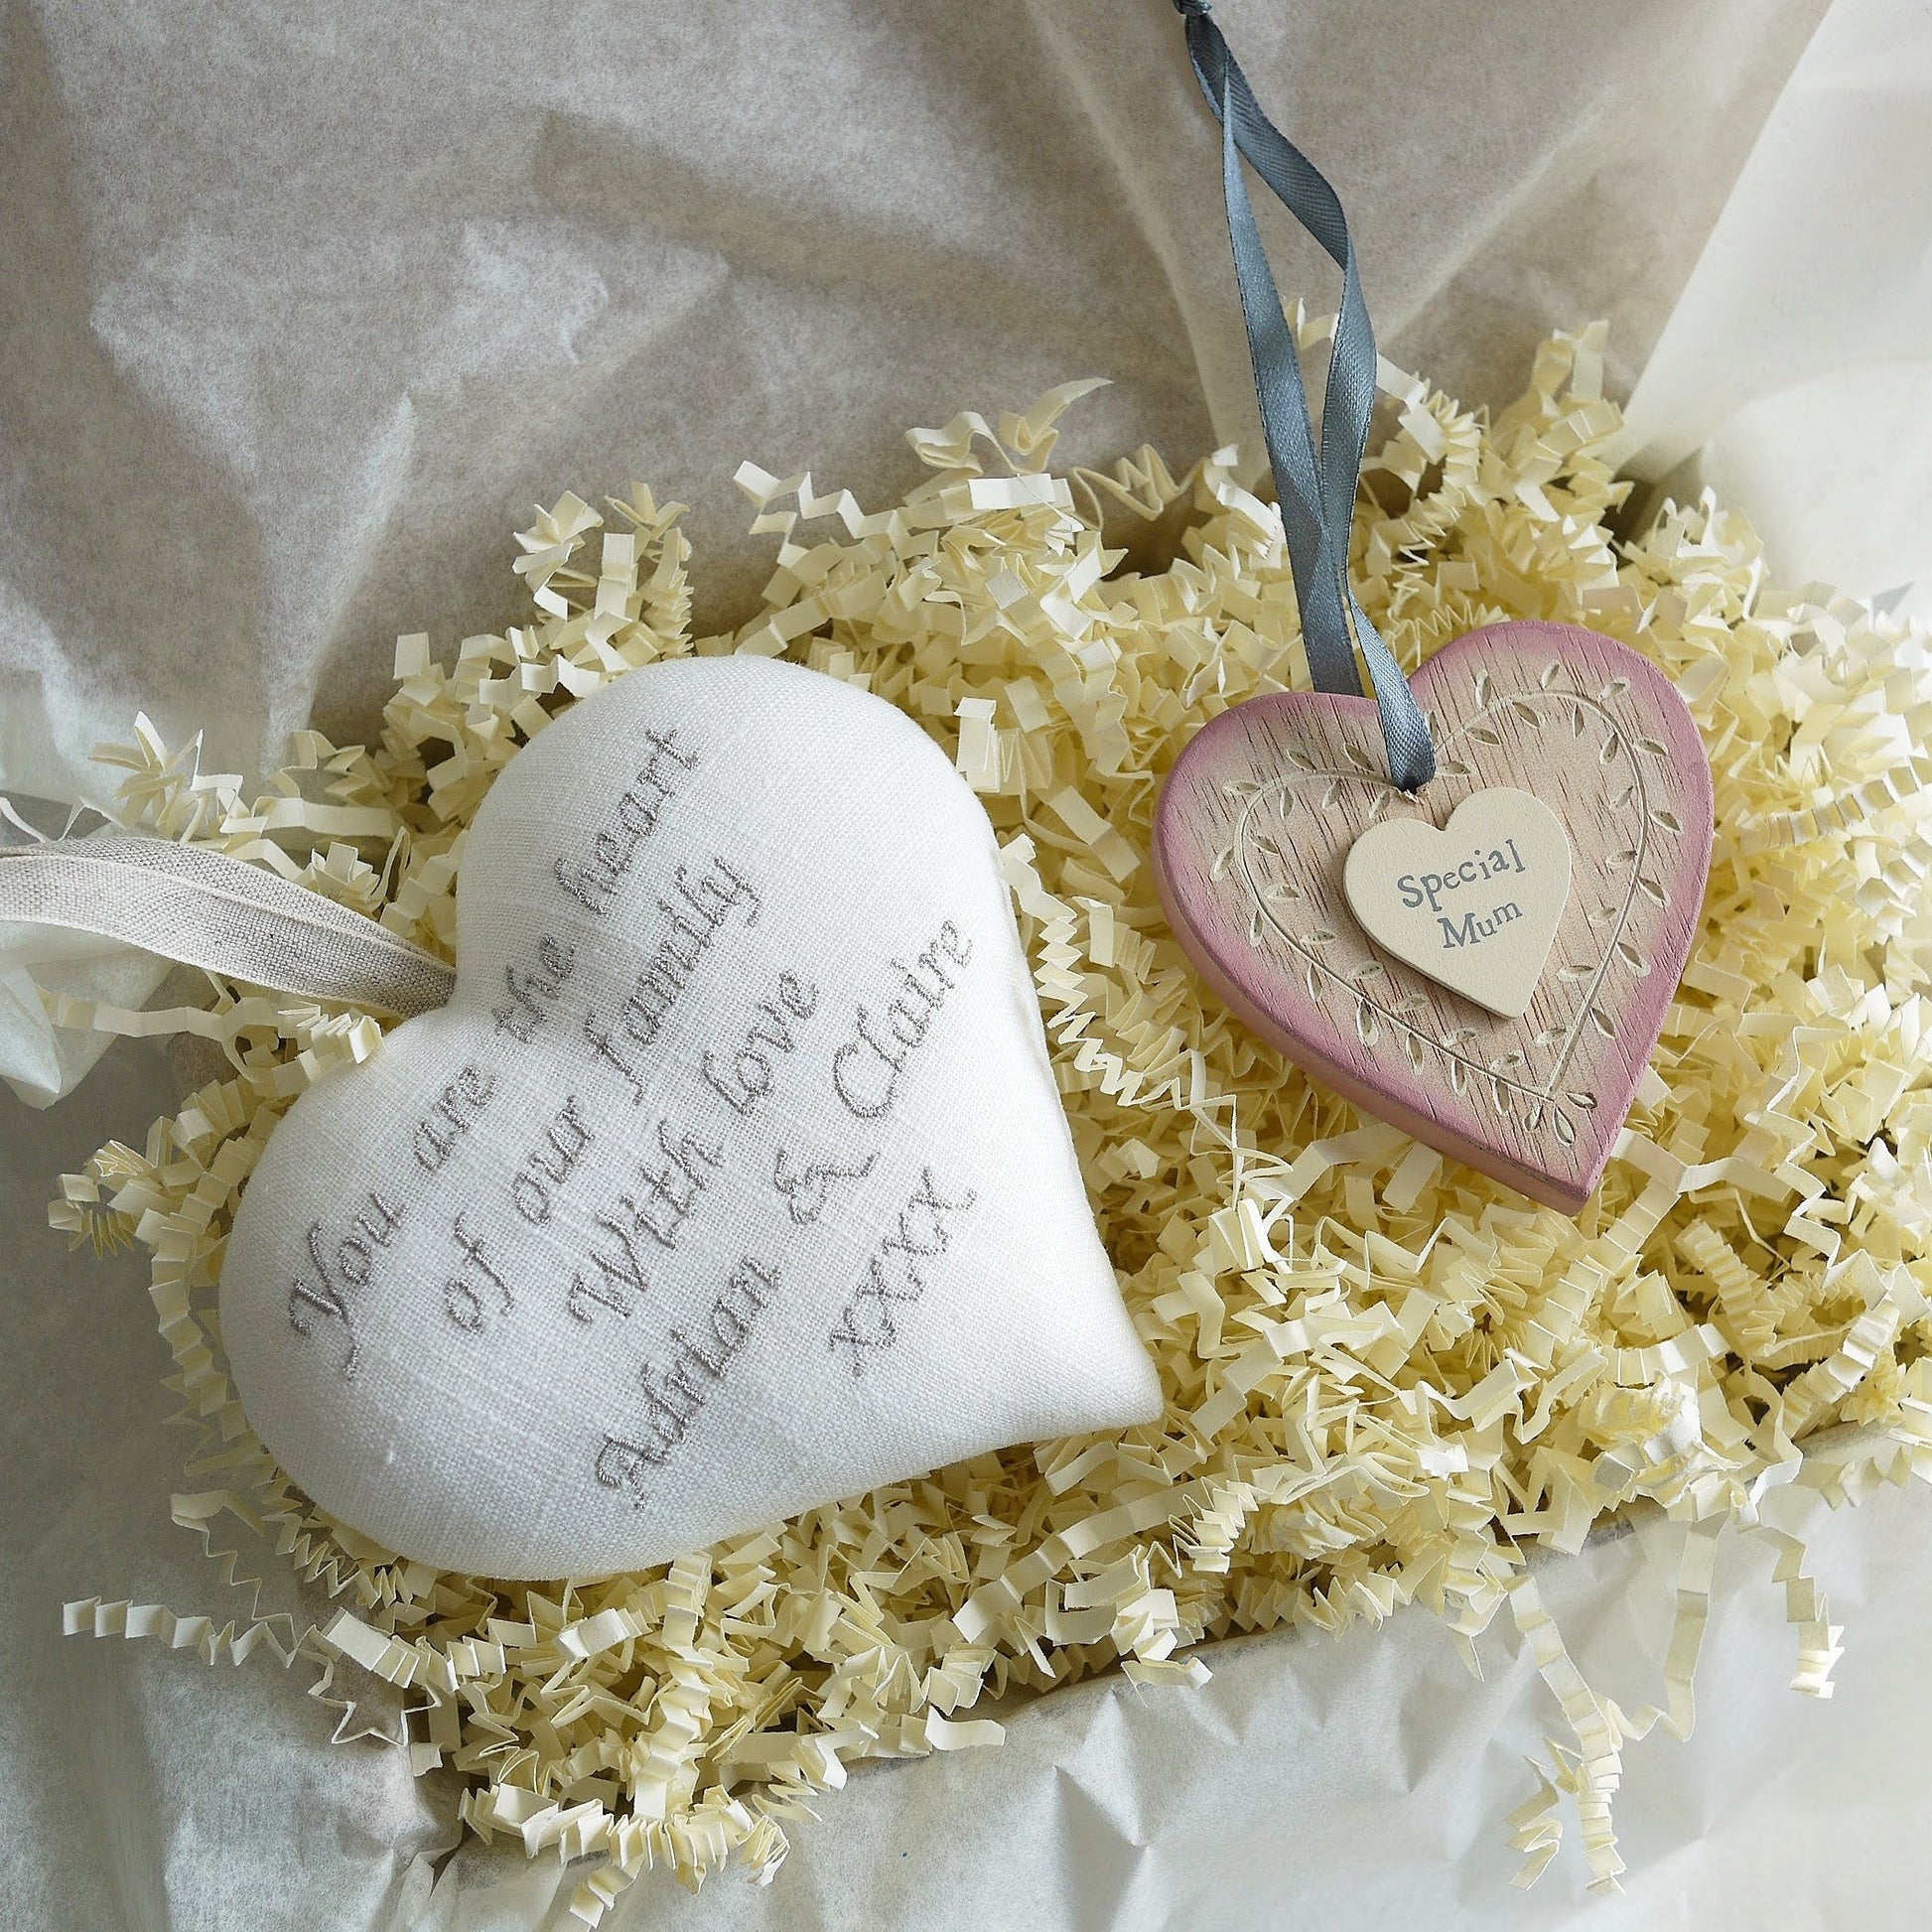 Personalised Heart & Mum Wooden Gift Set Mothers Day Gifts